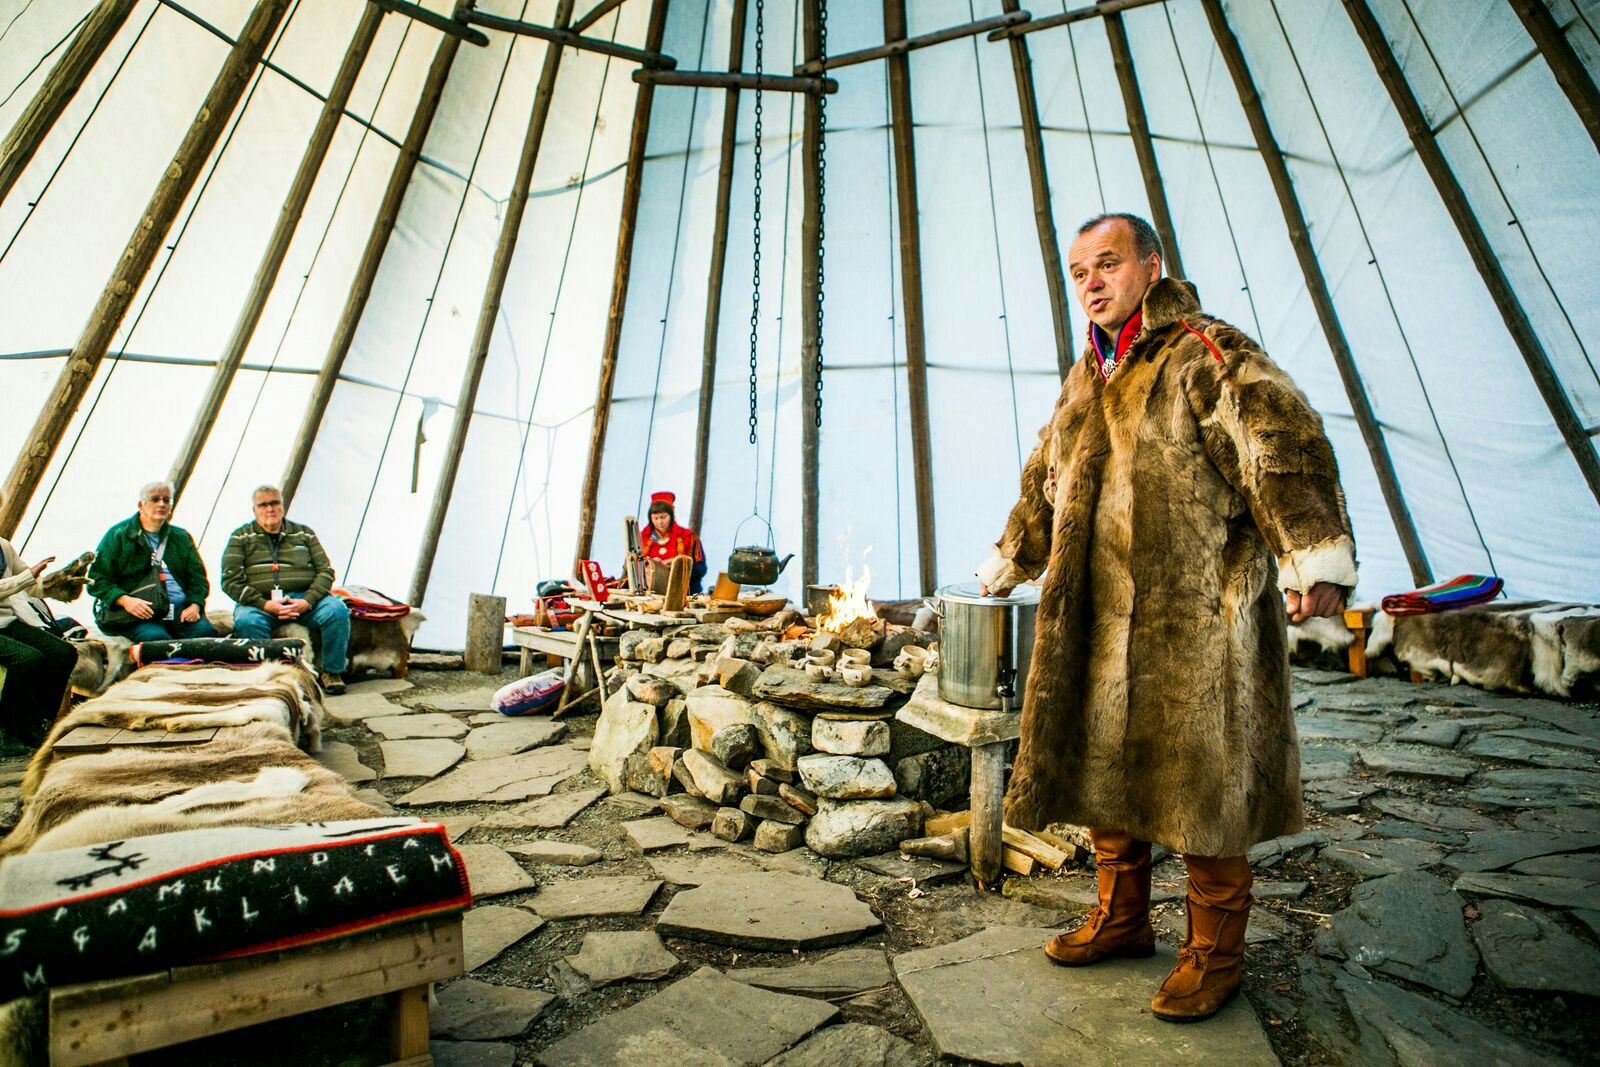 Davvi Siida talks to a group during a Sami Experience tour. He wears a large fur coat and is standing next to an open fire.